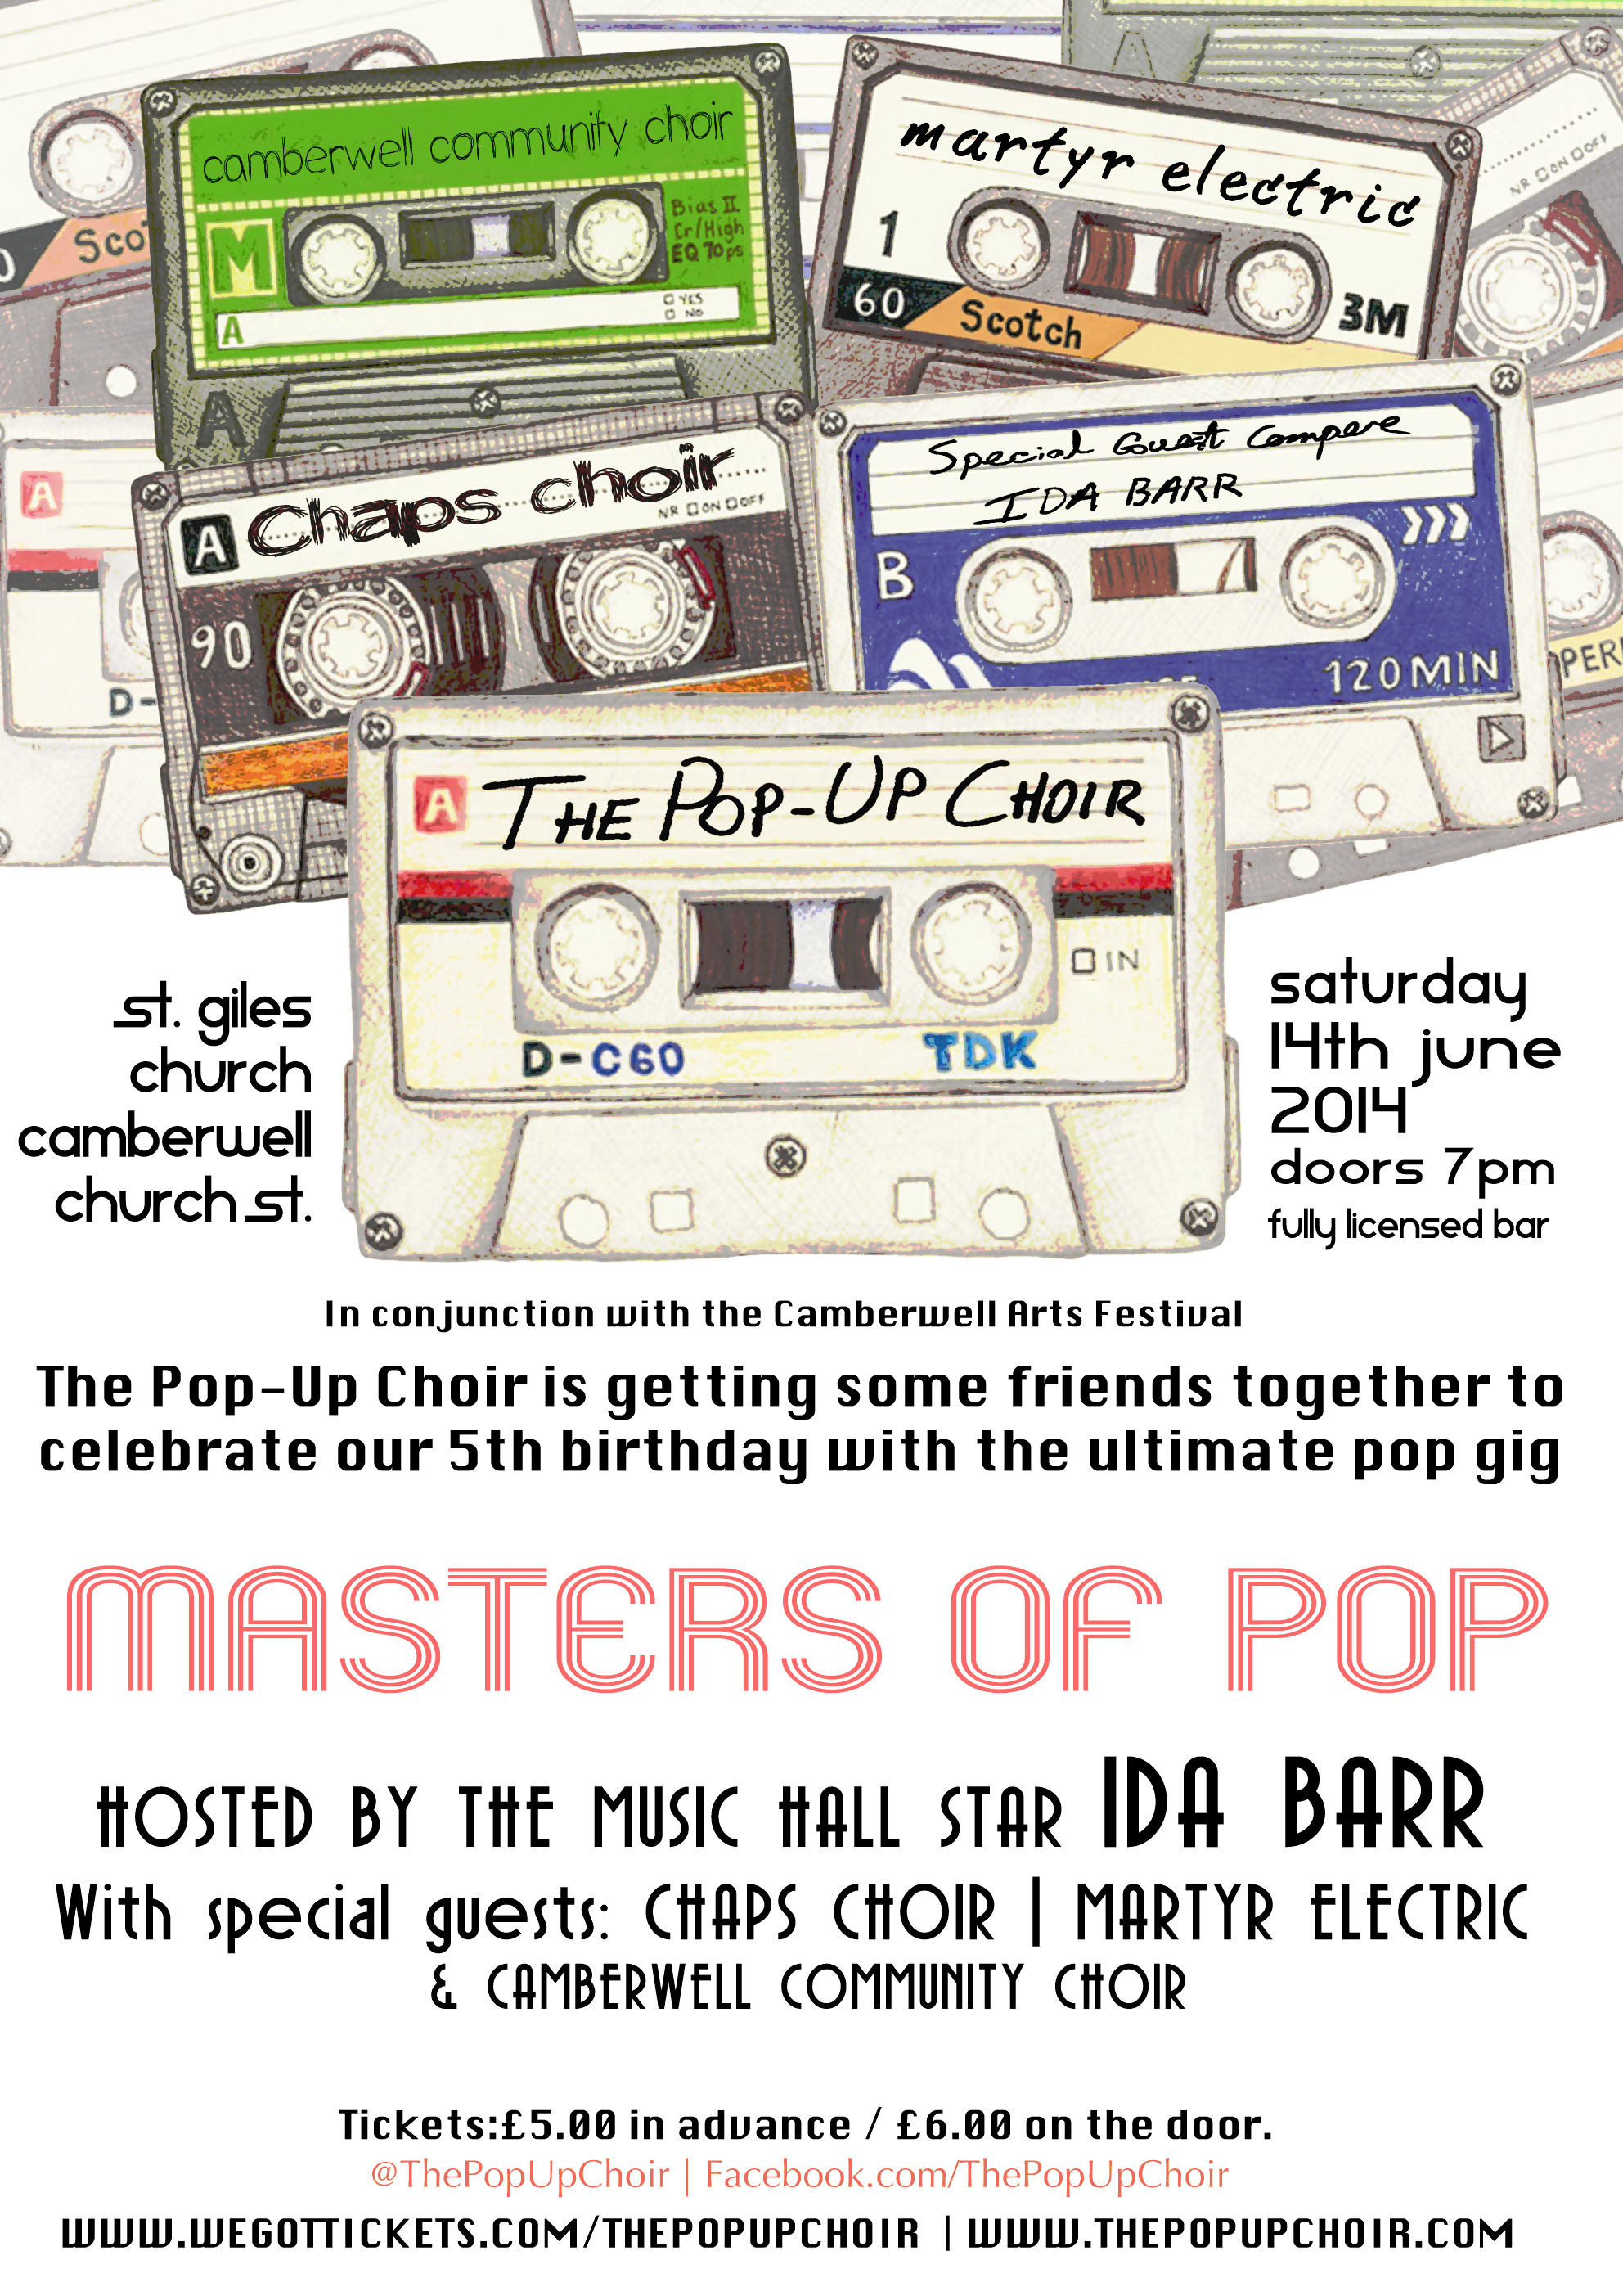 June - Our Masters of Pop flyers! Our 5th birthday gig was also the opening event of the 2014 Camberwell Arts Festival